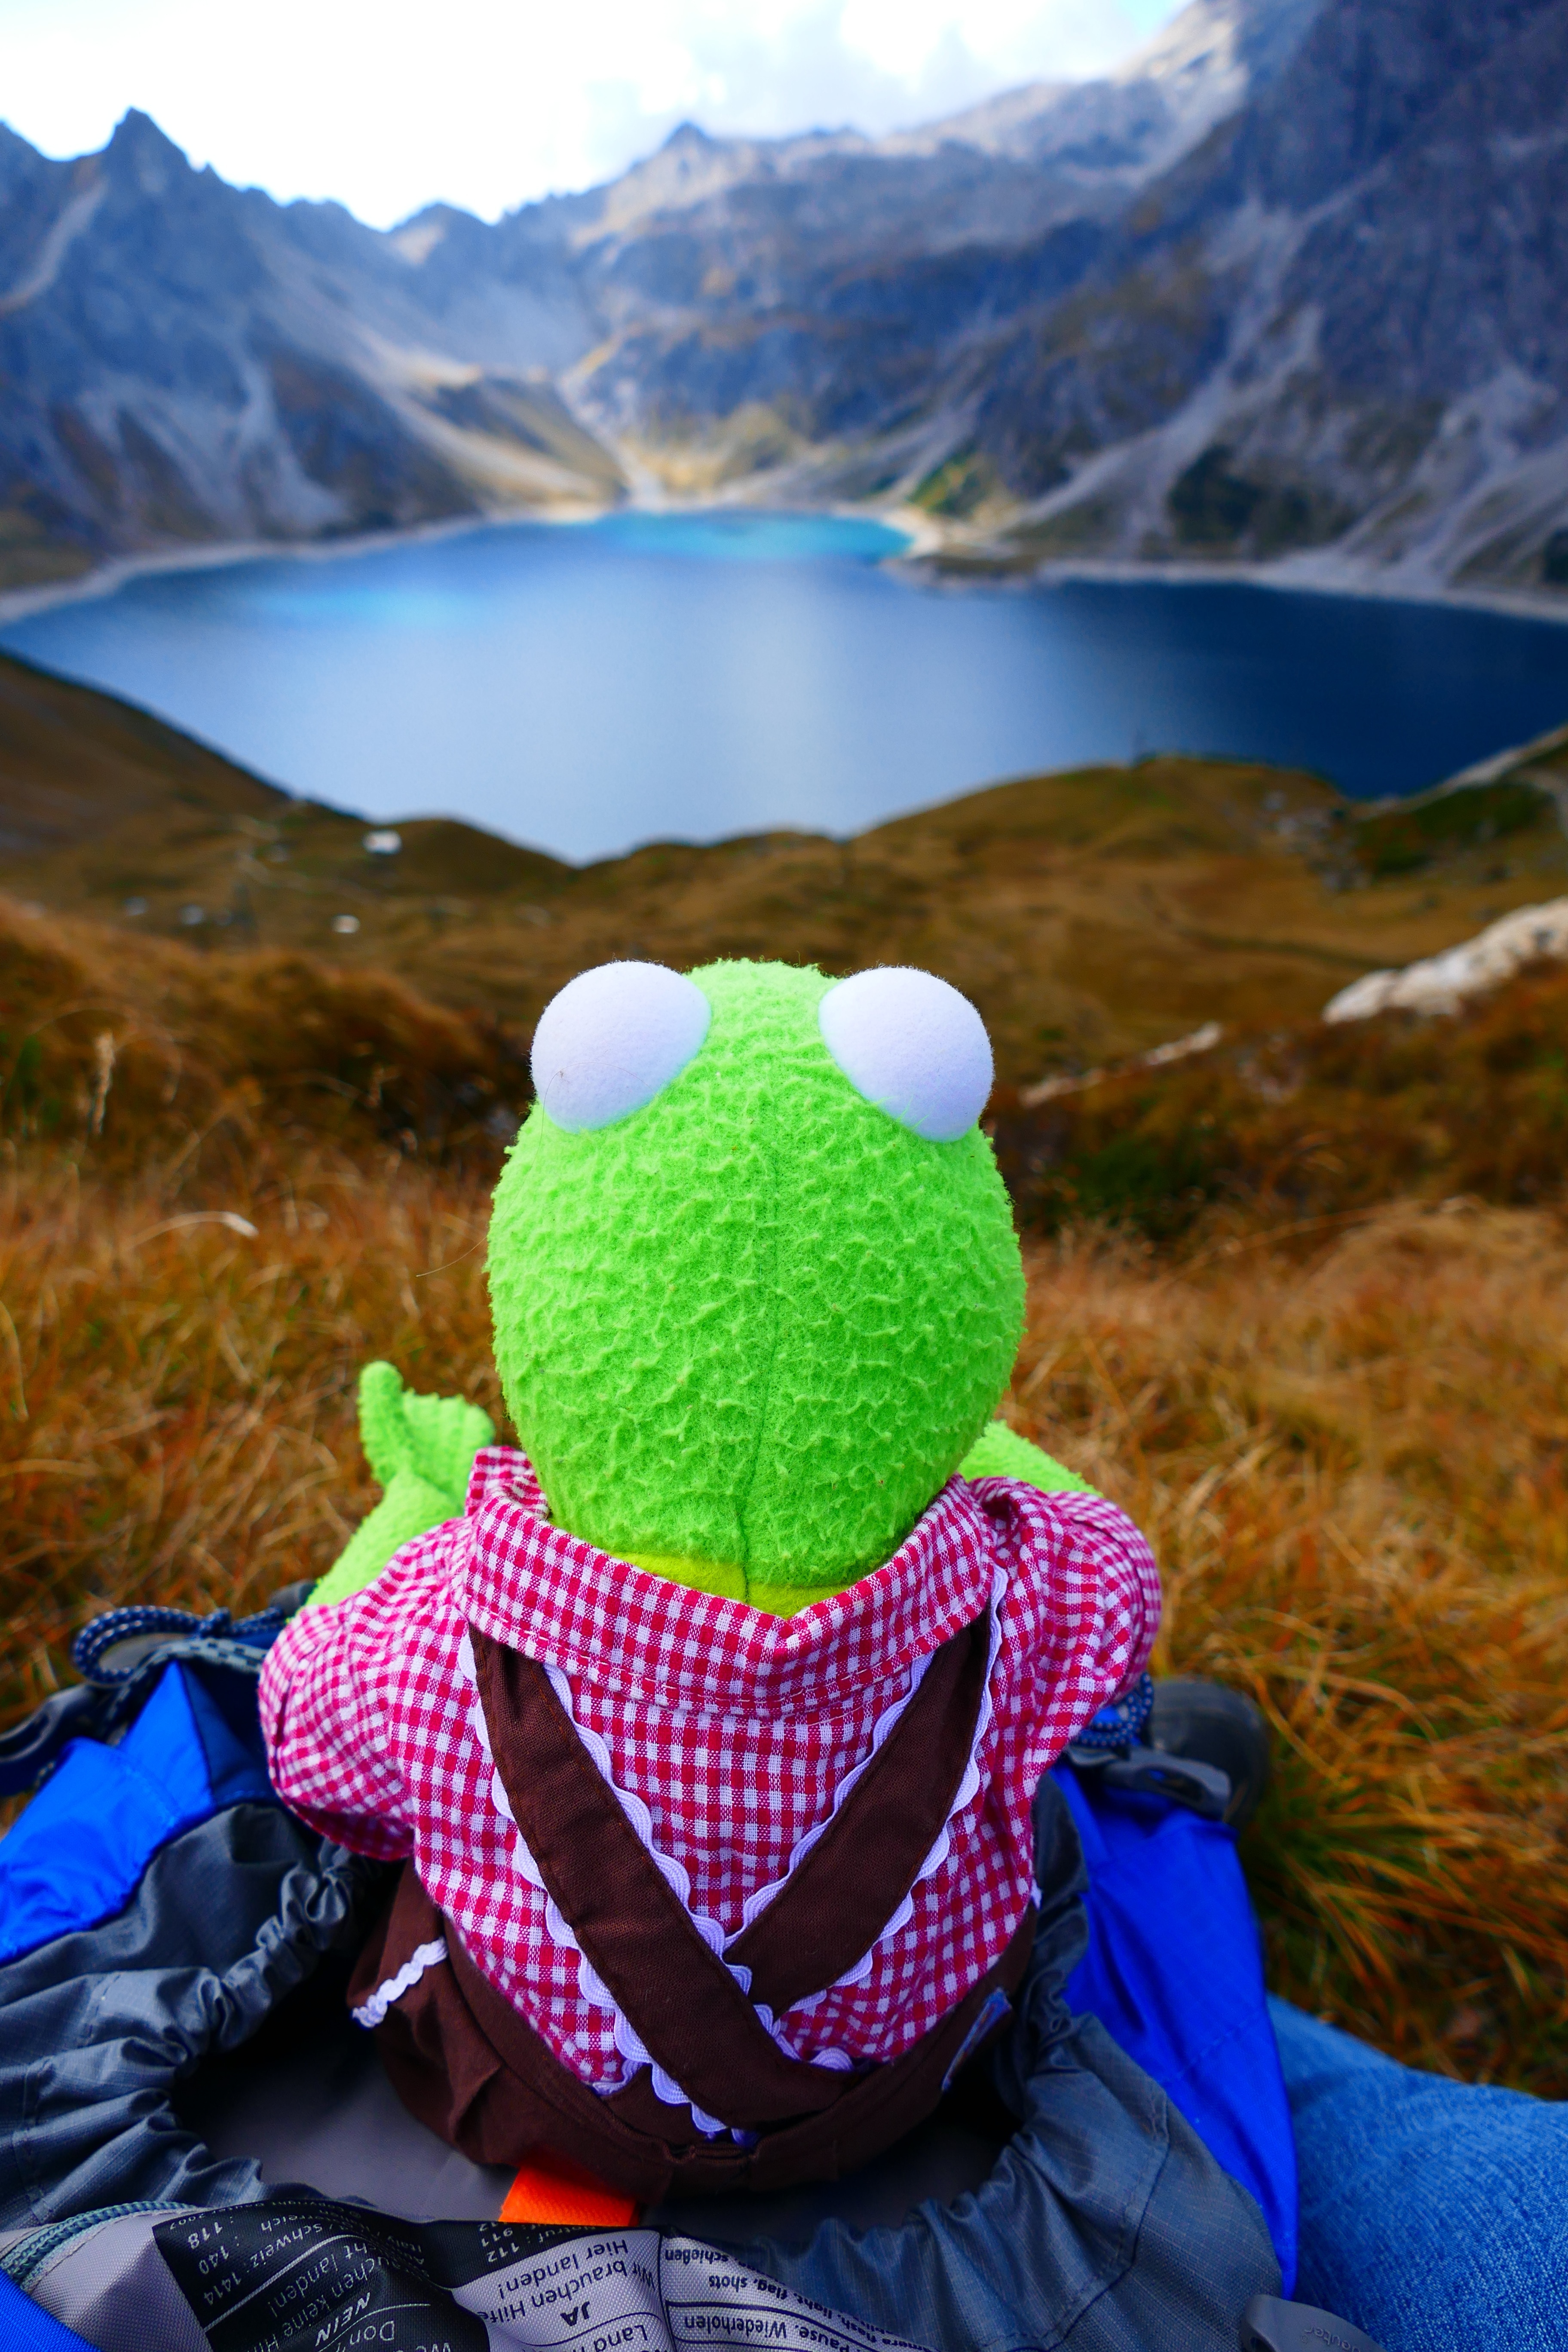 kermit the frog plush toy near blue body of water surrounded by mountains during daytime